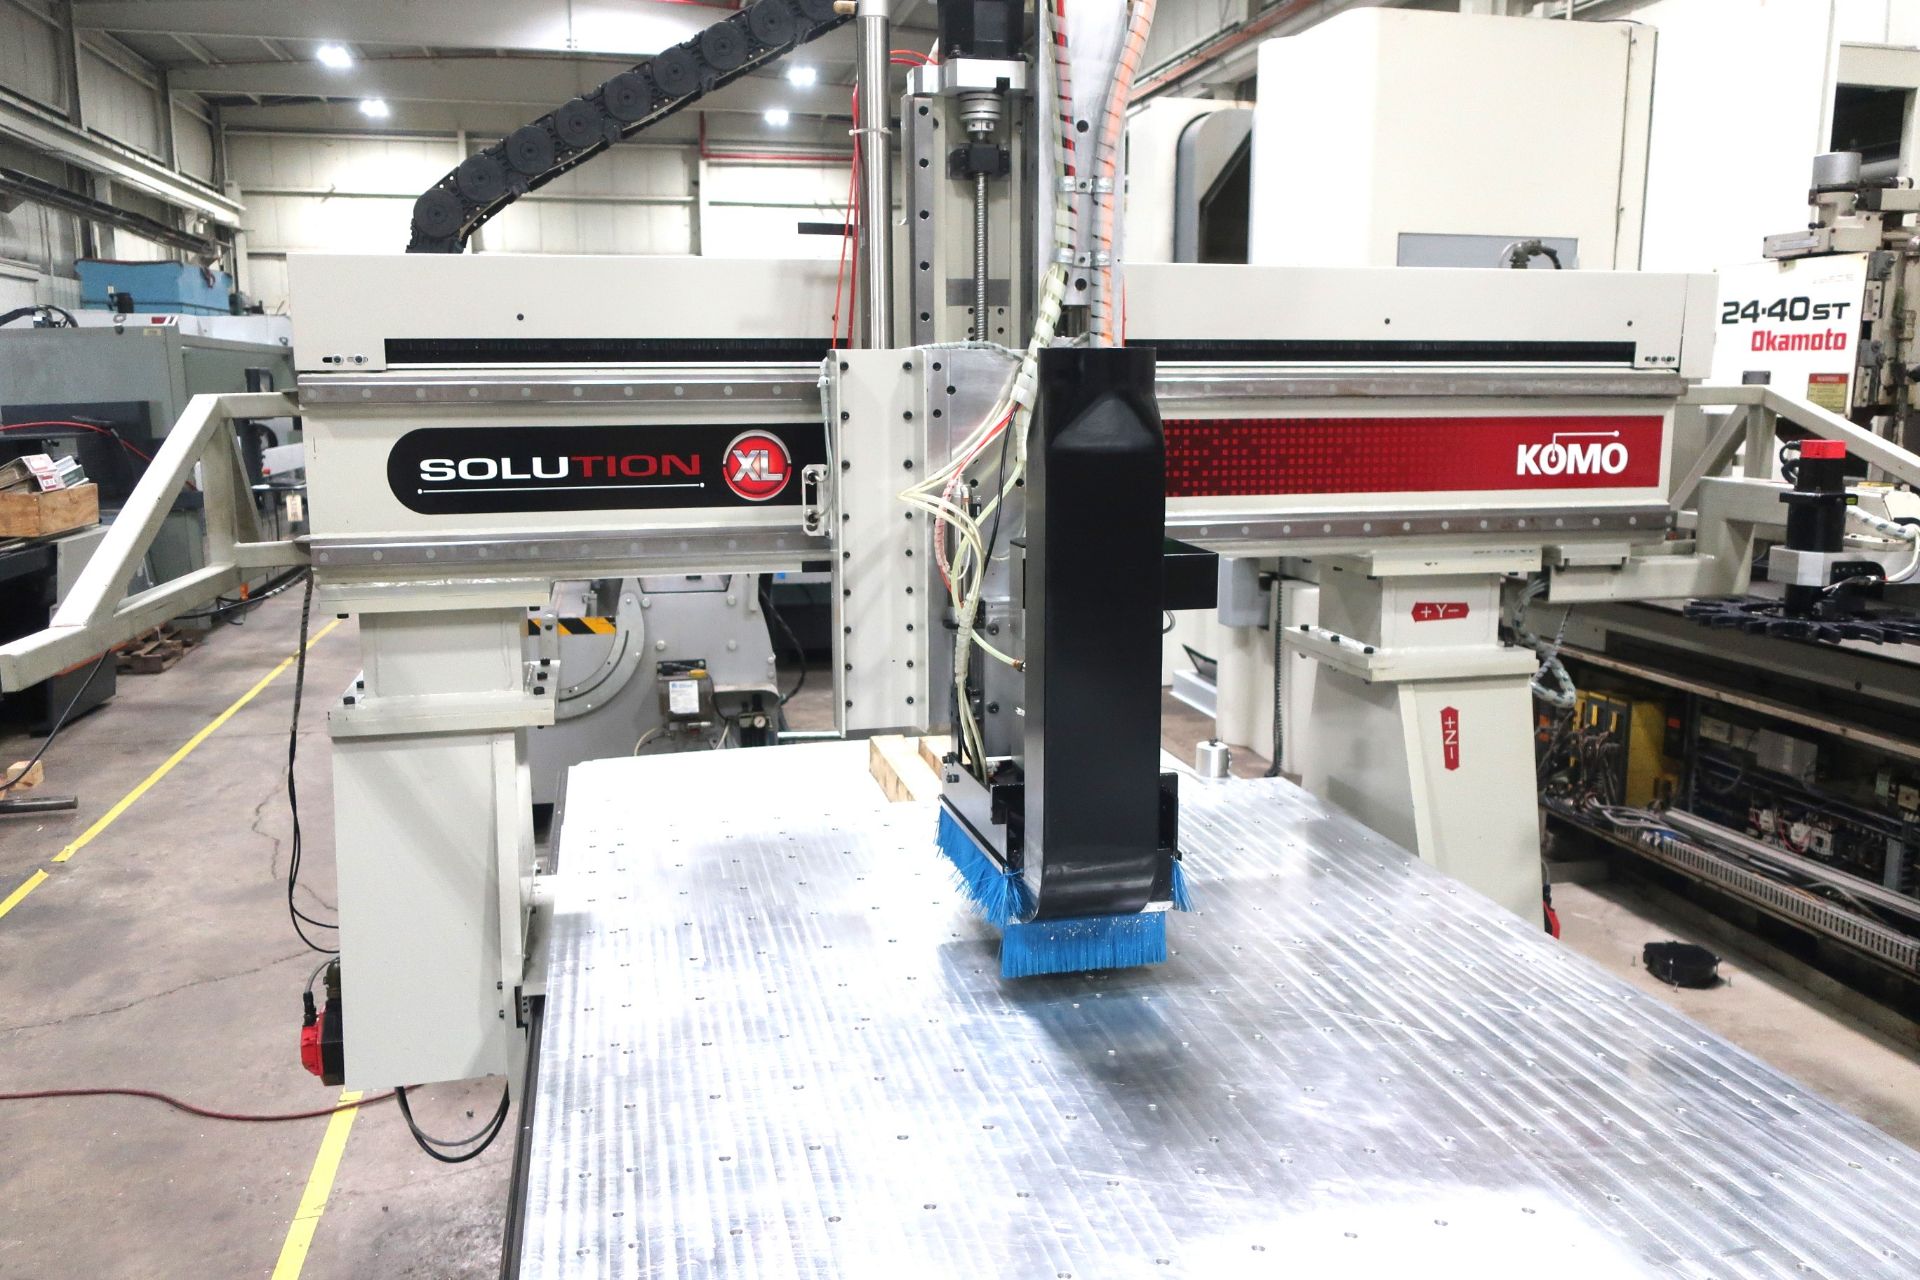 5'X24' KOMO XL-524 4-AXIS CNC ROUTER, S/N 01202-14, NEW 2015 - Image 4 of 16